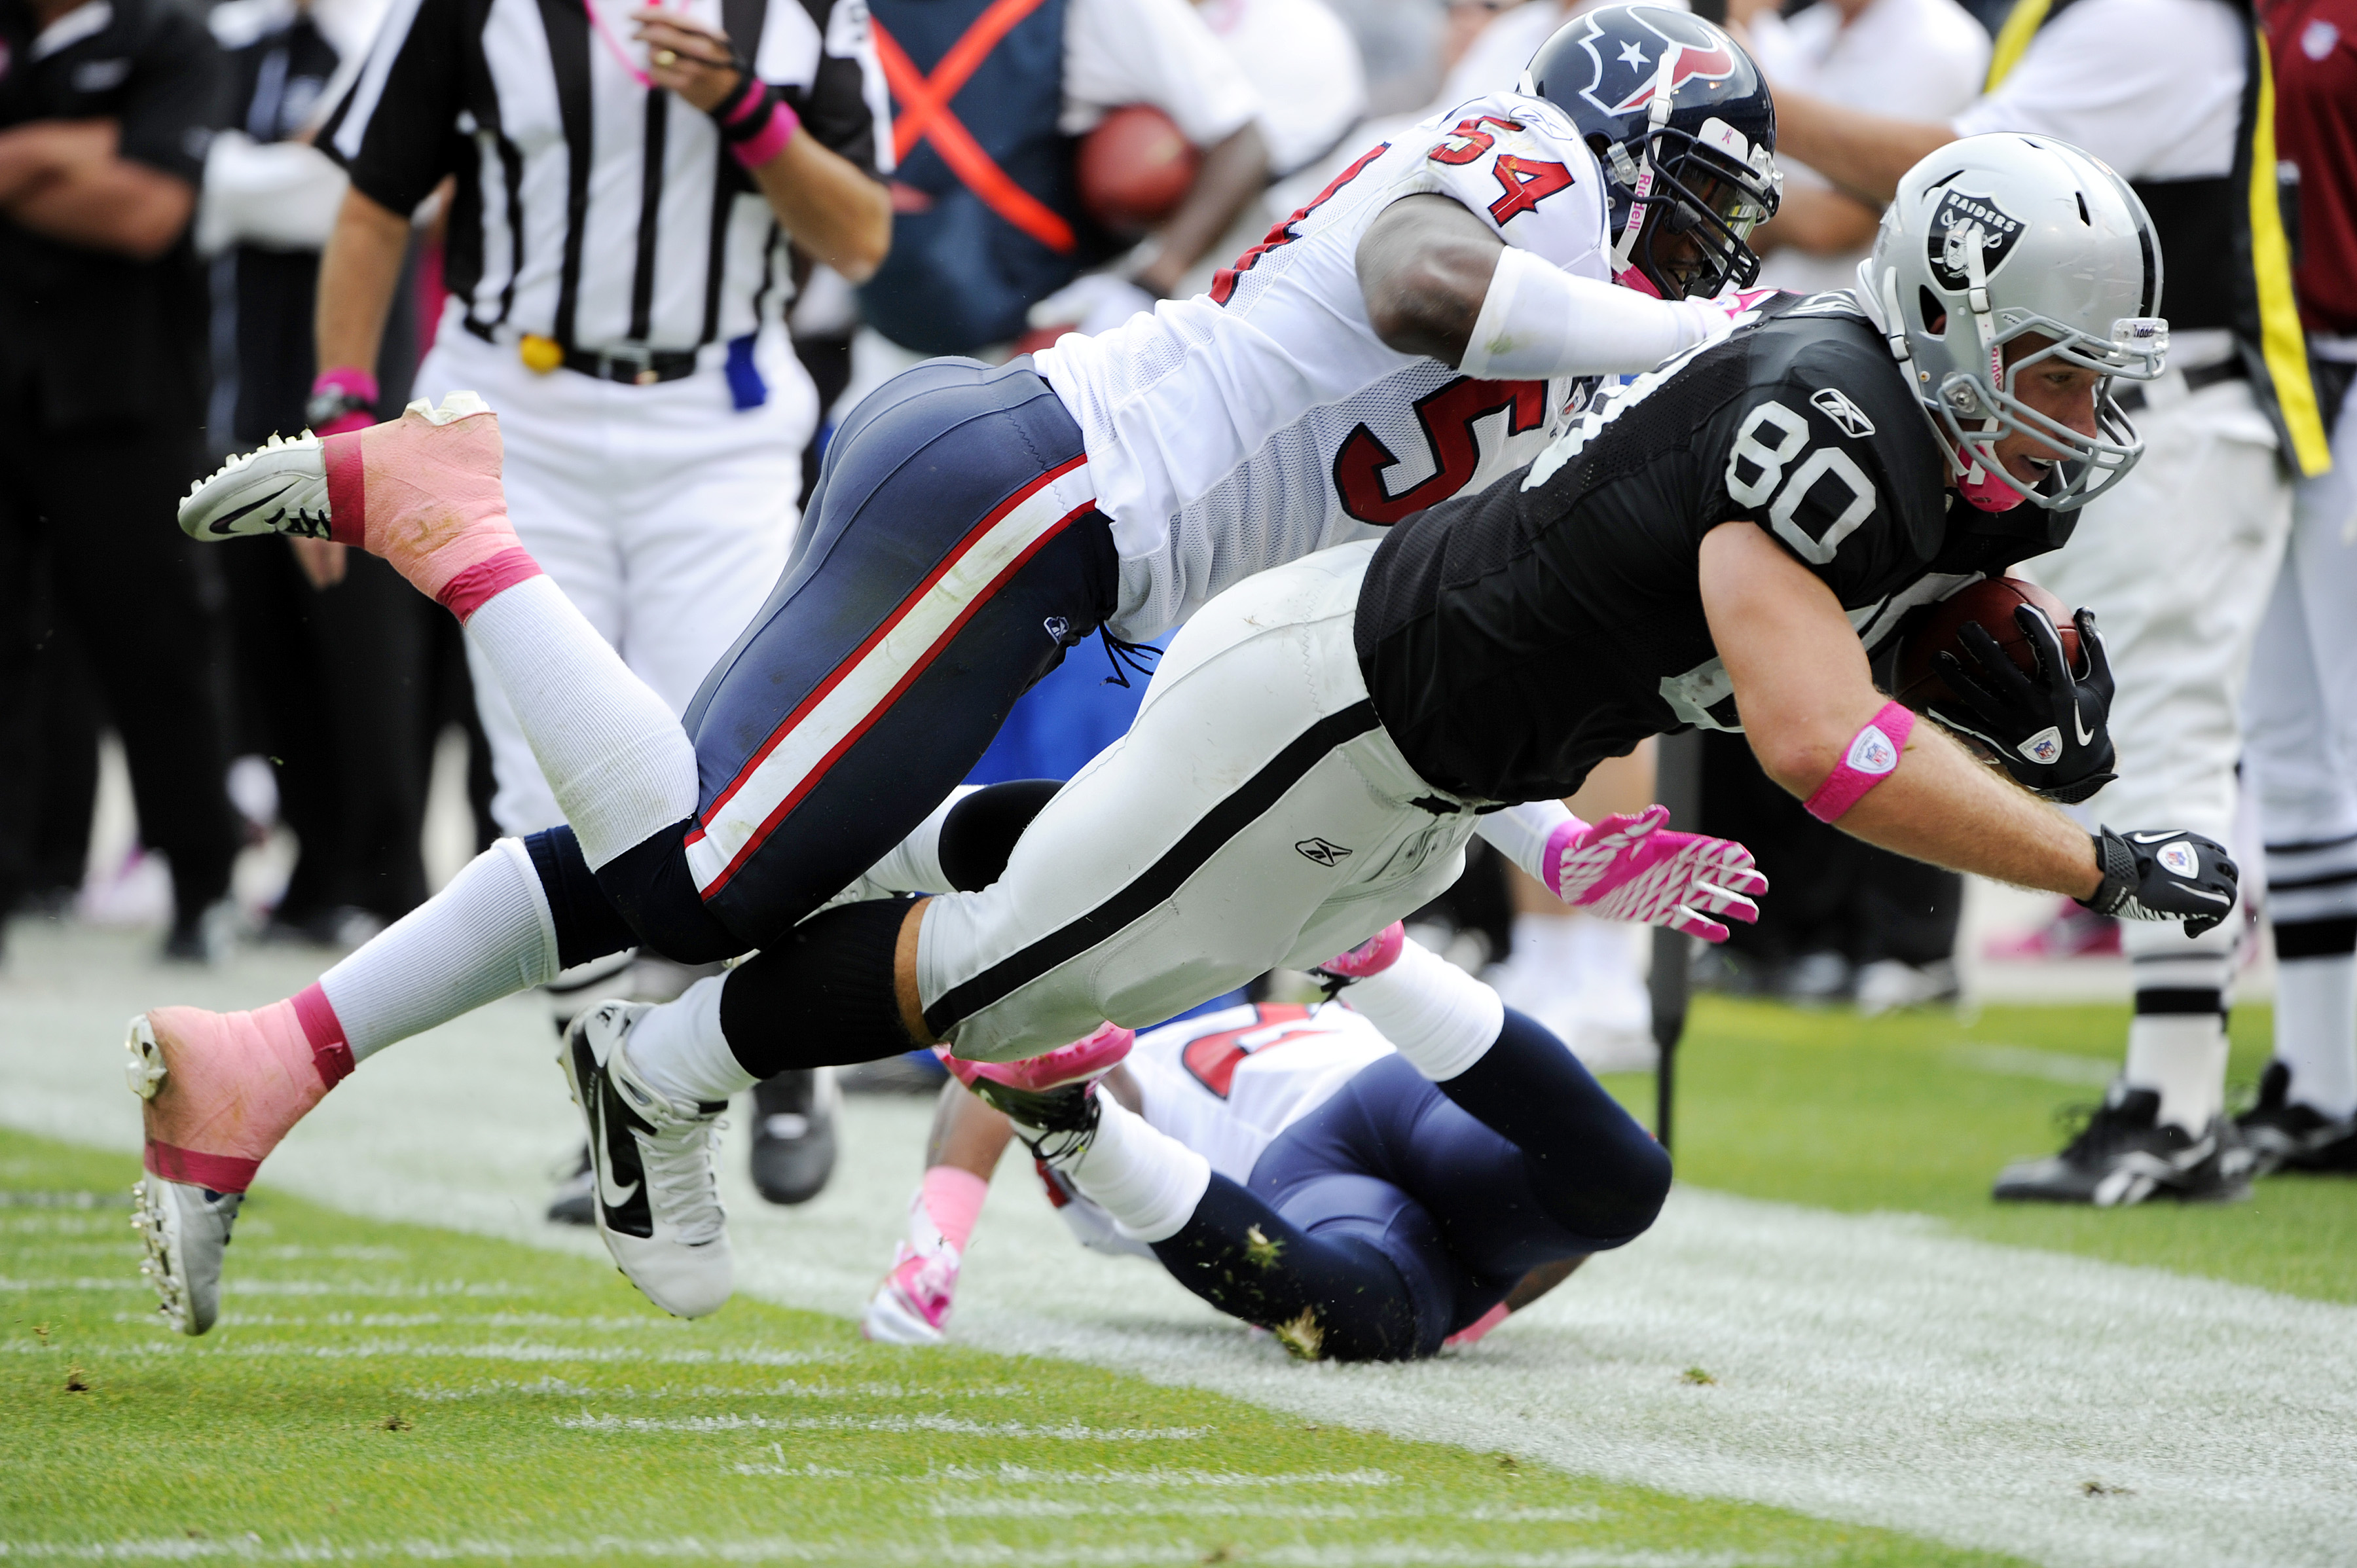 Zach Miller controlling the position of the linebackers could be key for the Raiders.